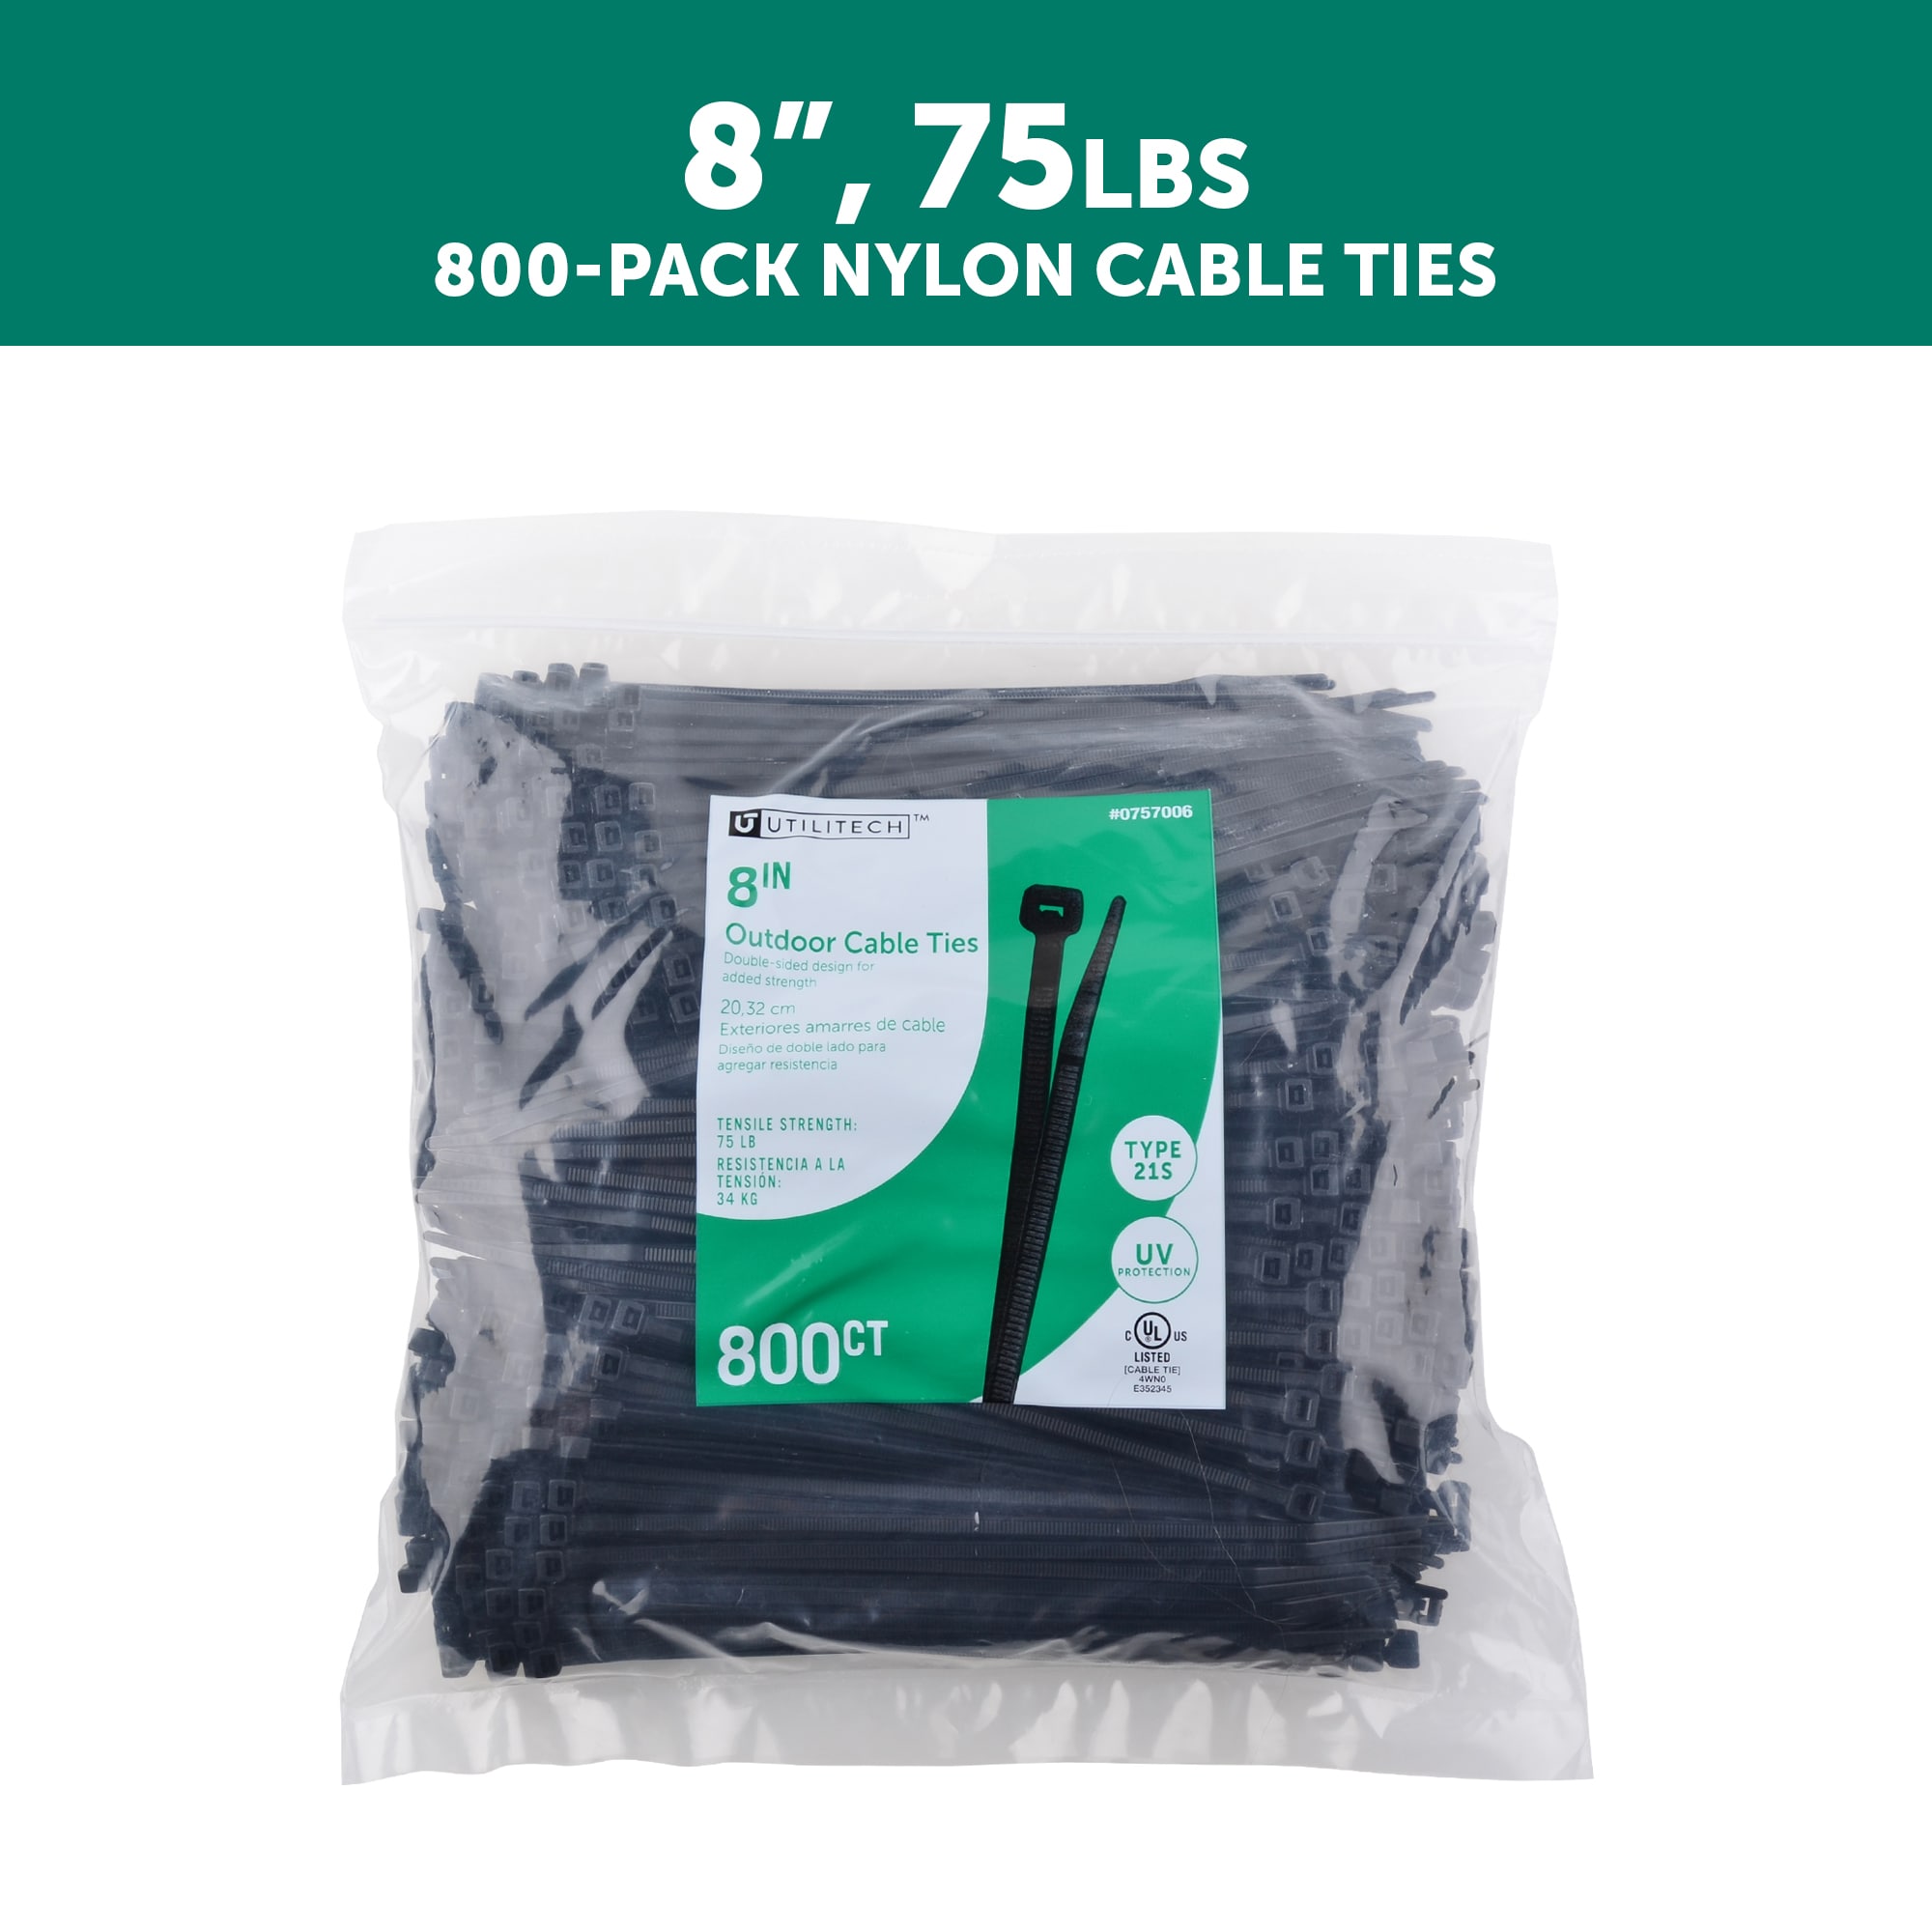 Cable Wrap-Lite Mini Velcro Ties - Small Cable 100/1000 Pack